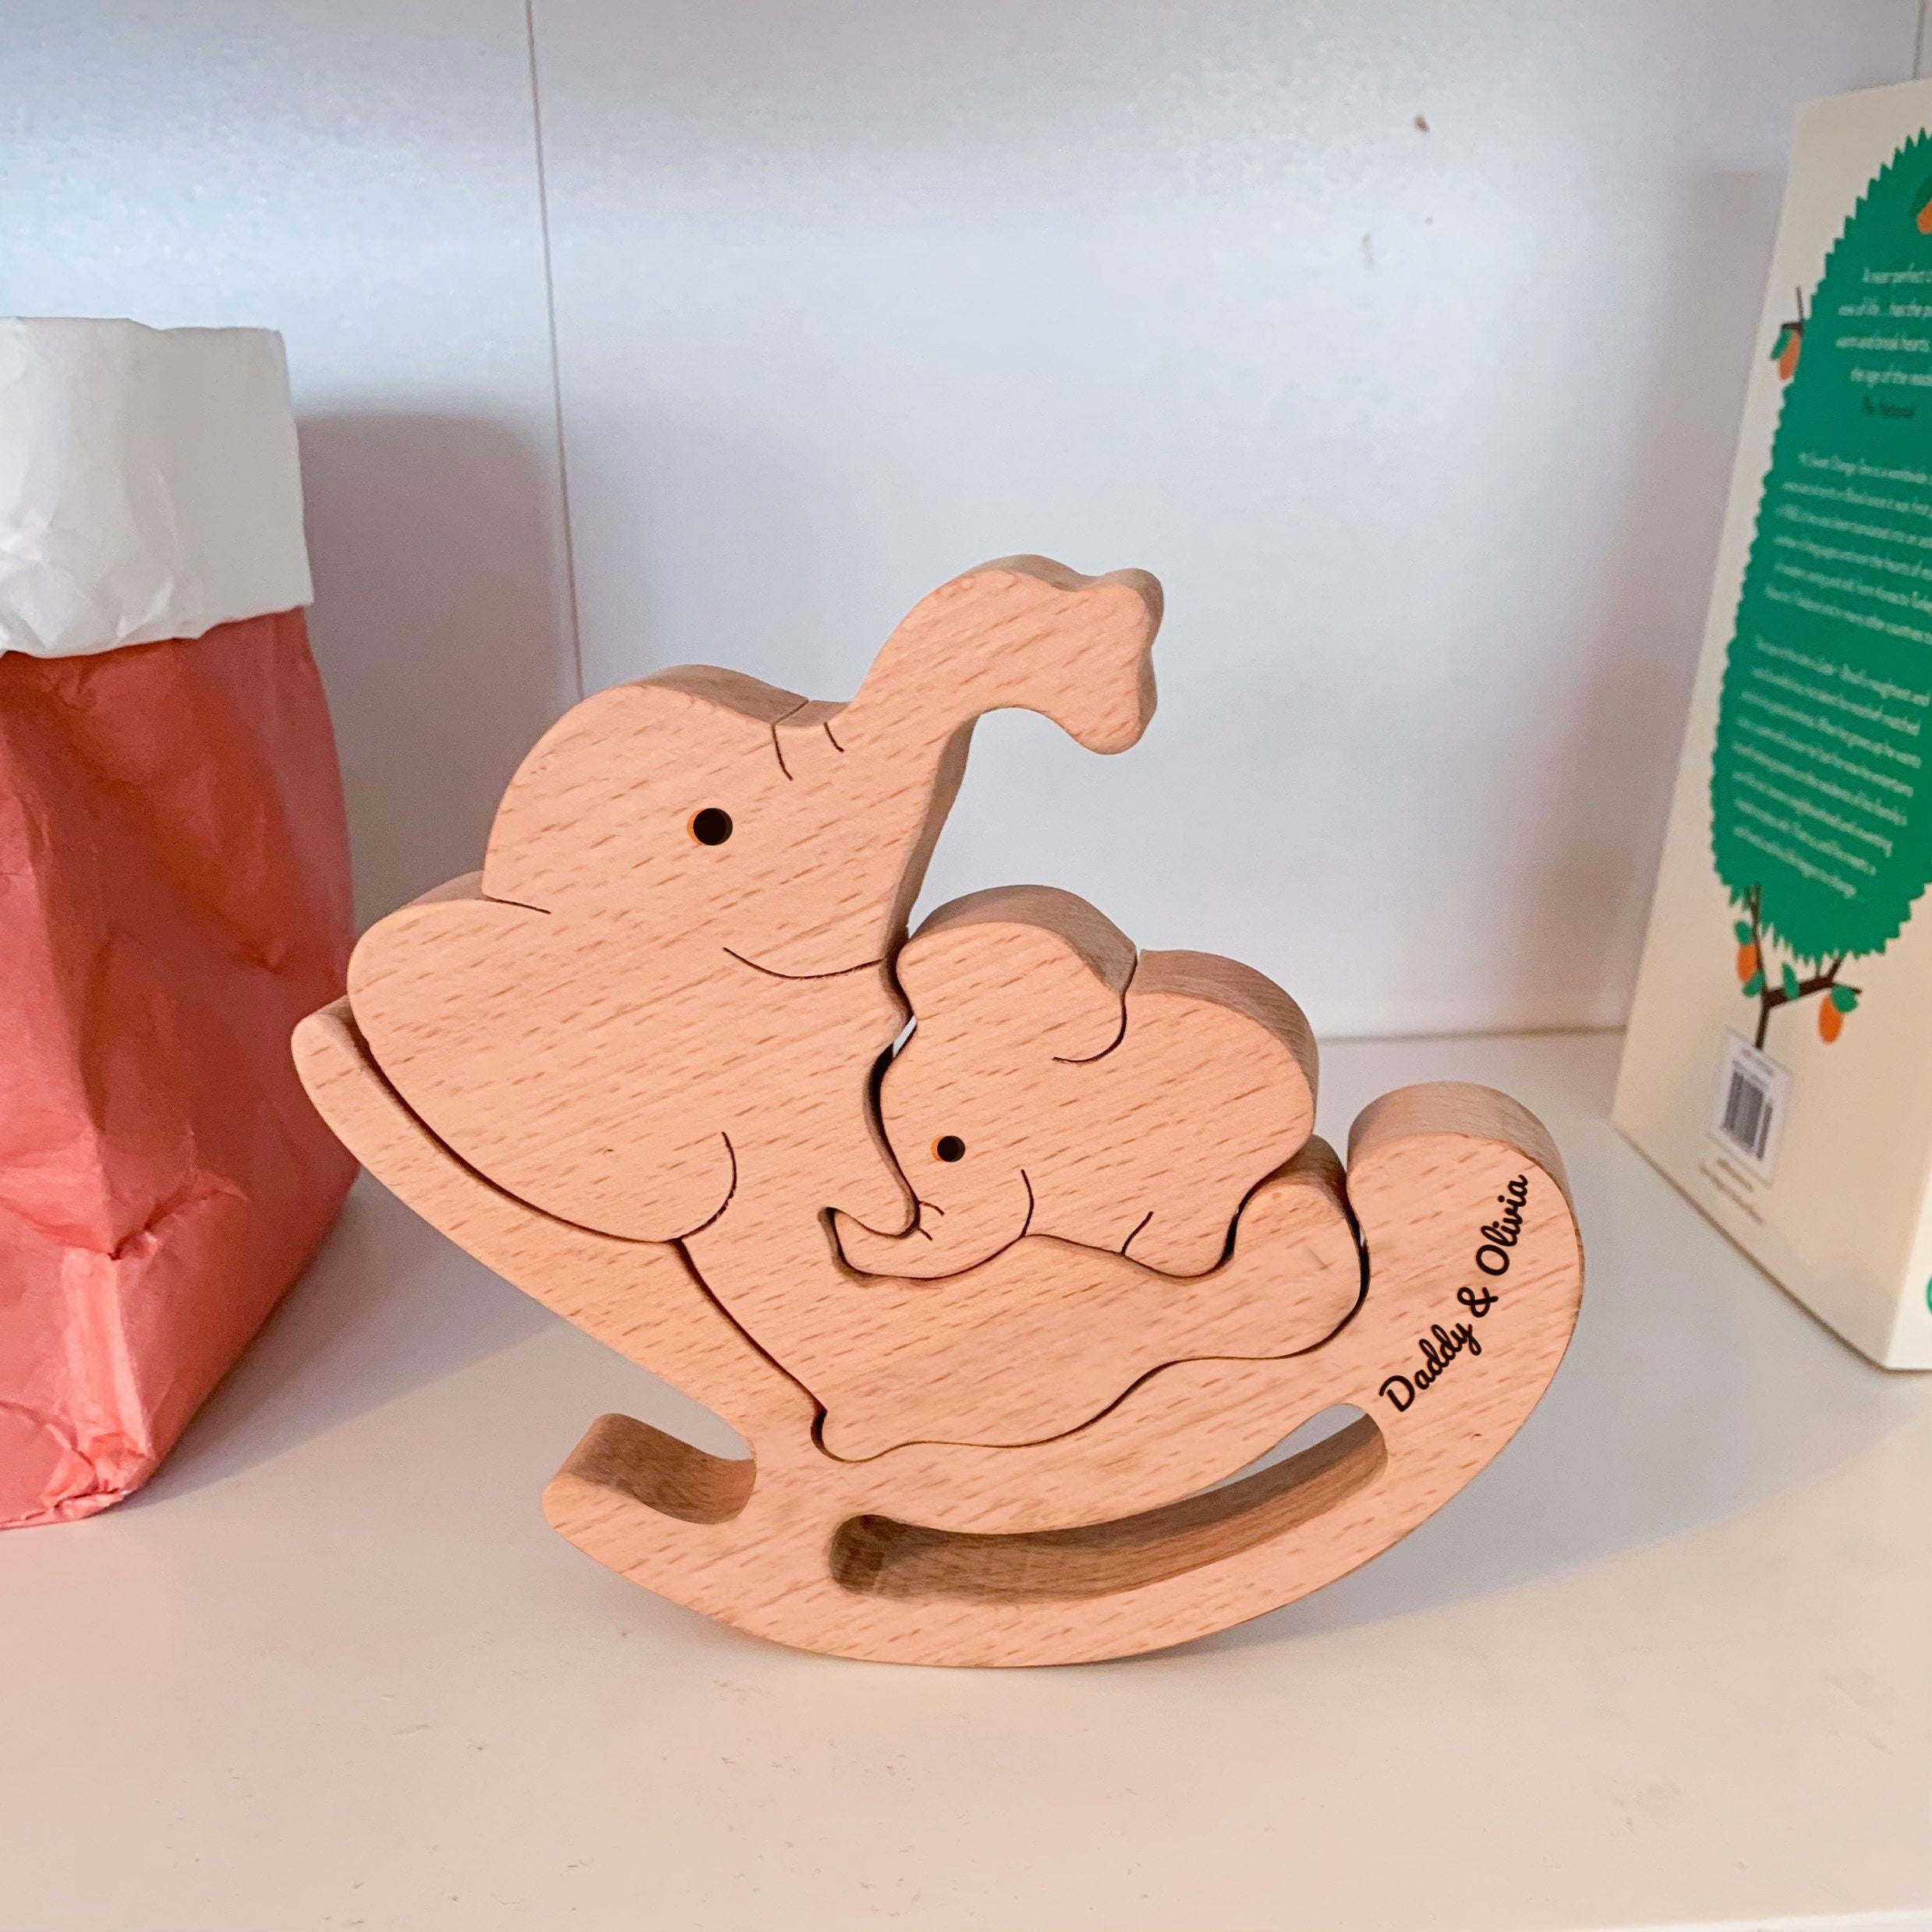 Personalised handmade wooden Elephant dad and baby Christmas Birthday Fathers Day gift for dad